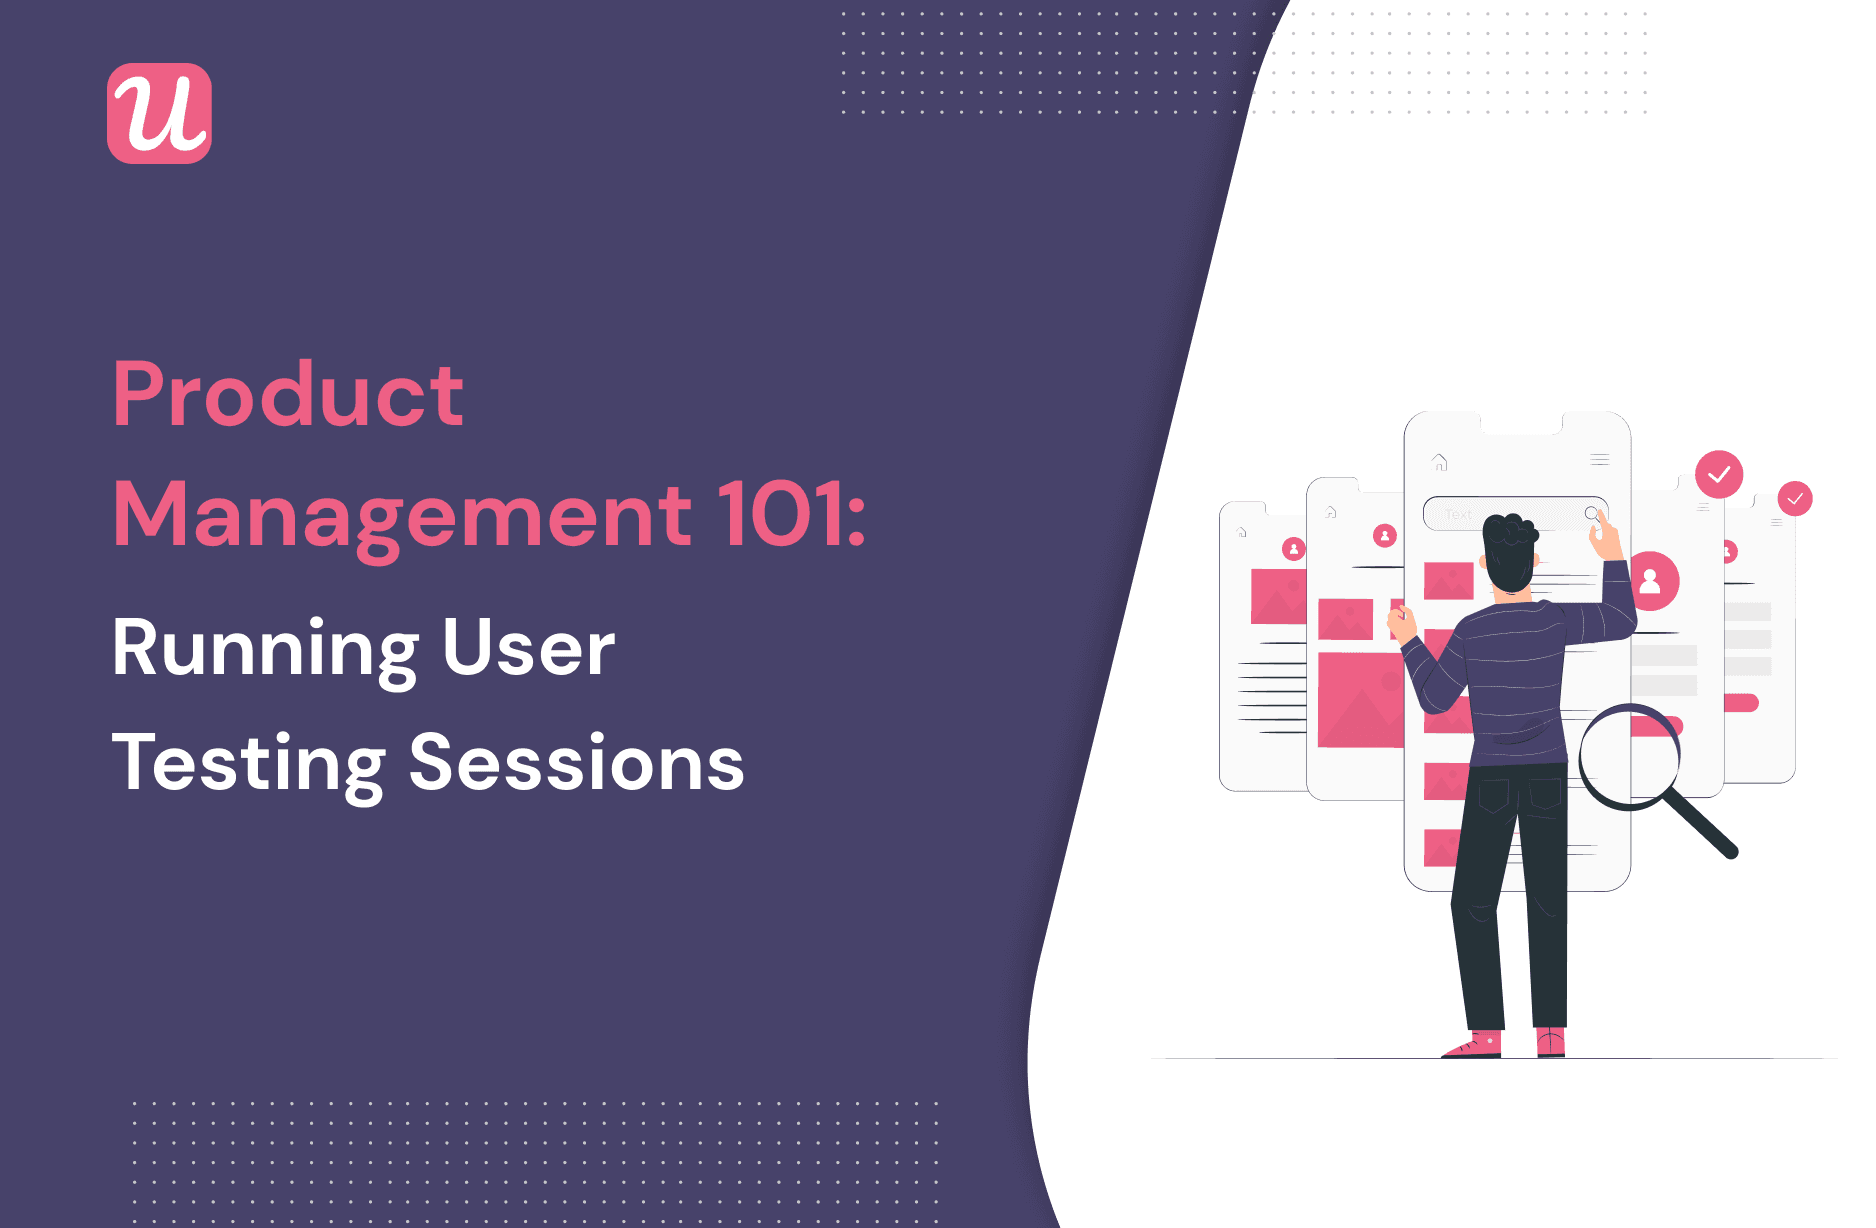 Product Management 101: Running User Testing Sessions